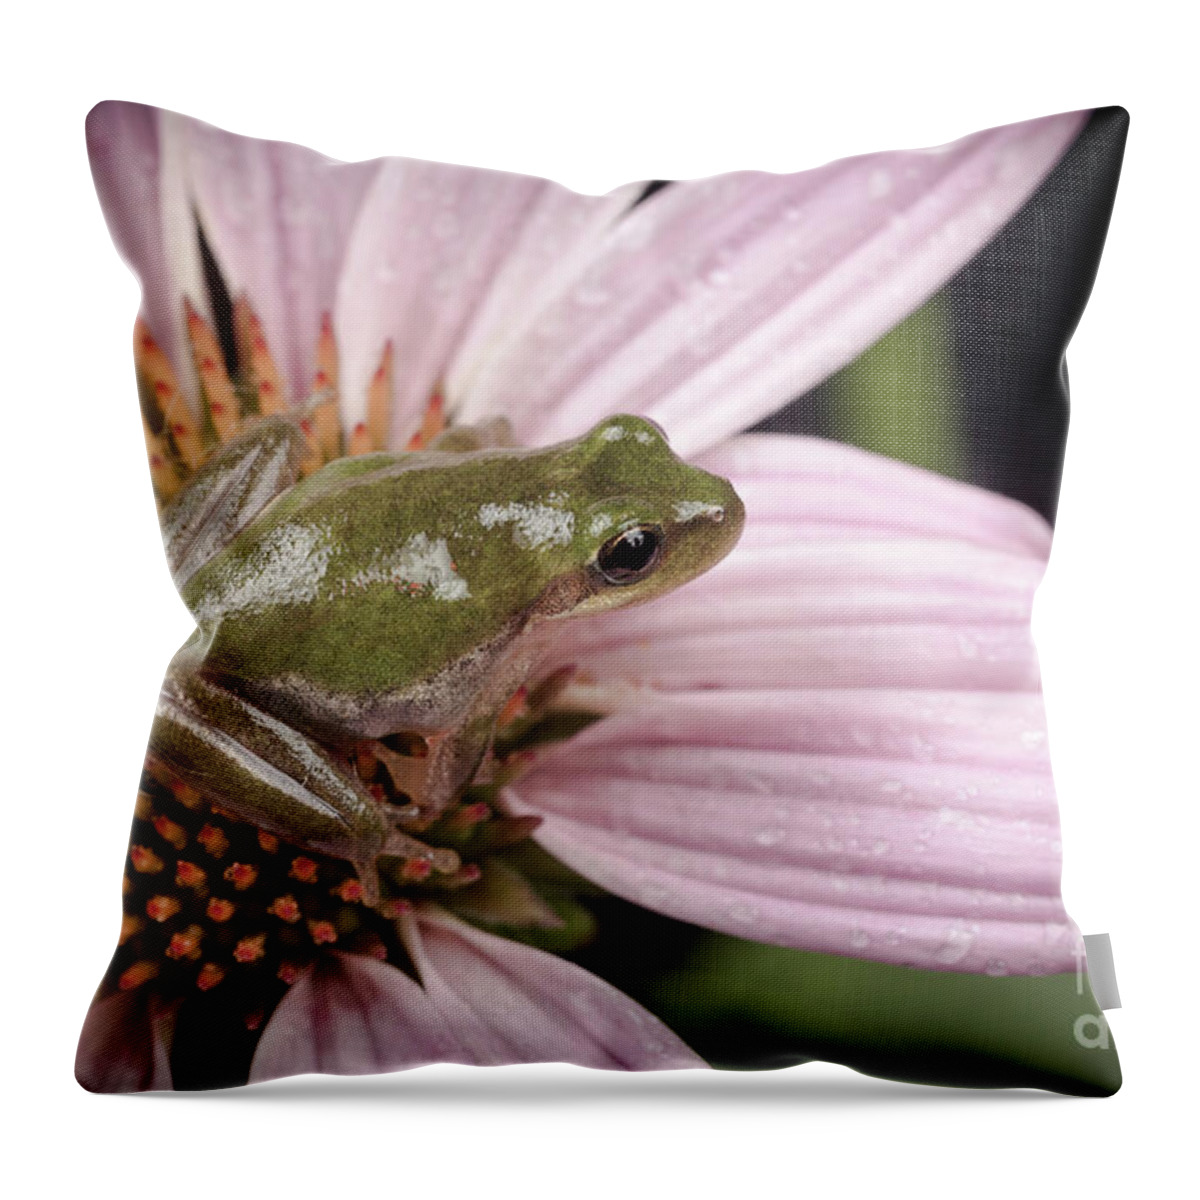 Echinacea Flower Throw Pillow featuring the photograph Treefrog by Maresa Pryor-Luzier